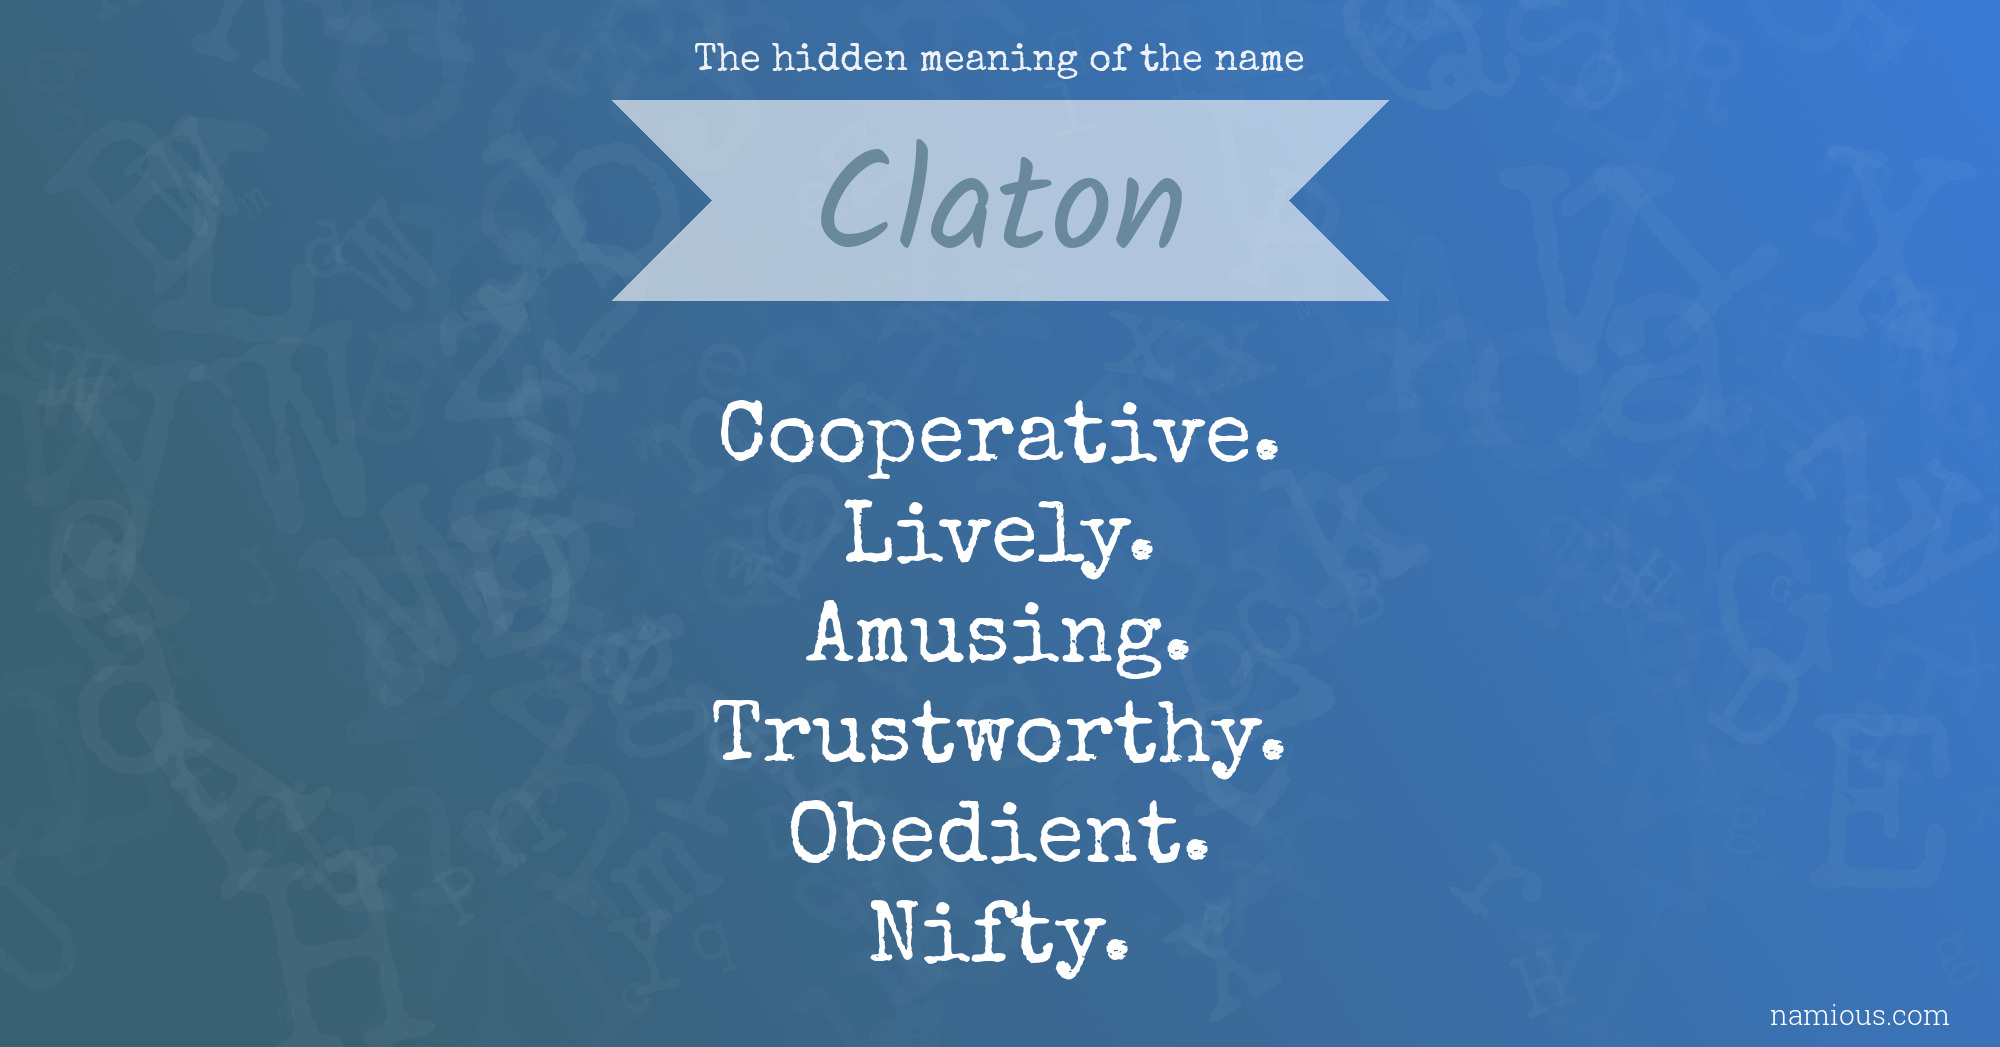 The hidden meaning of the name Claton